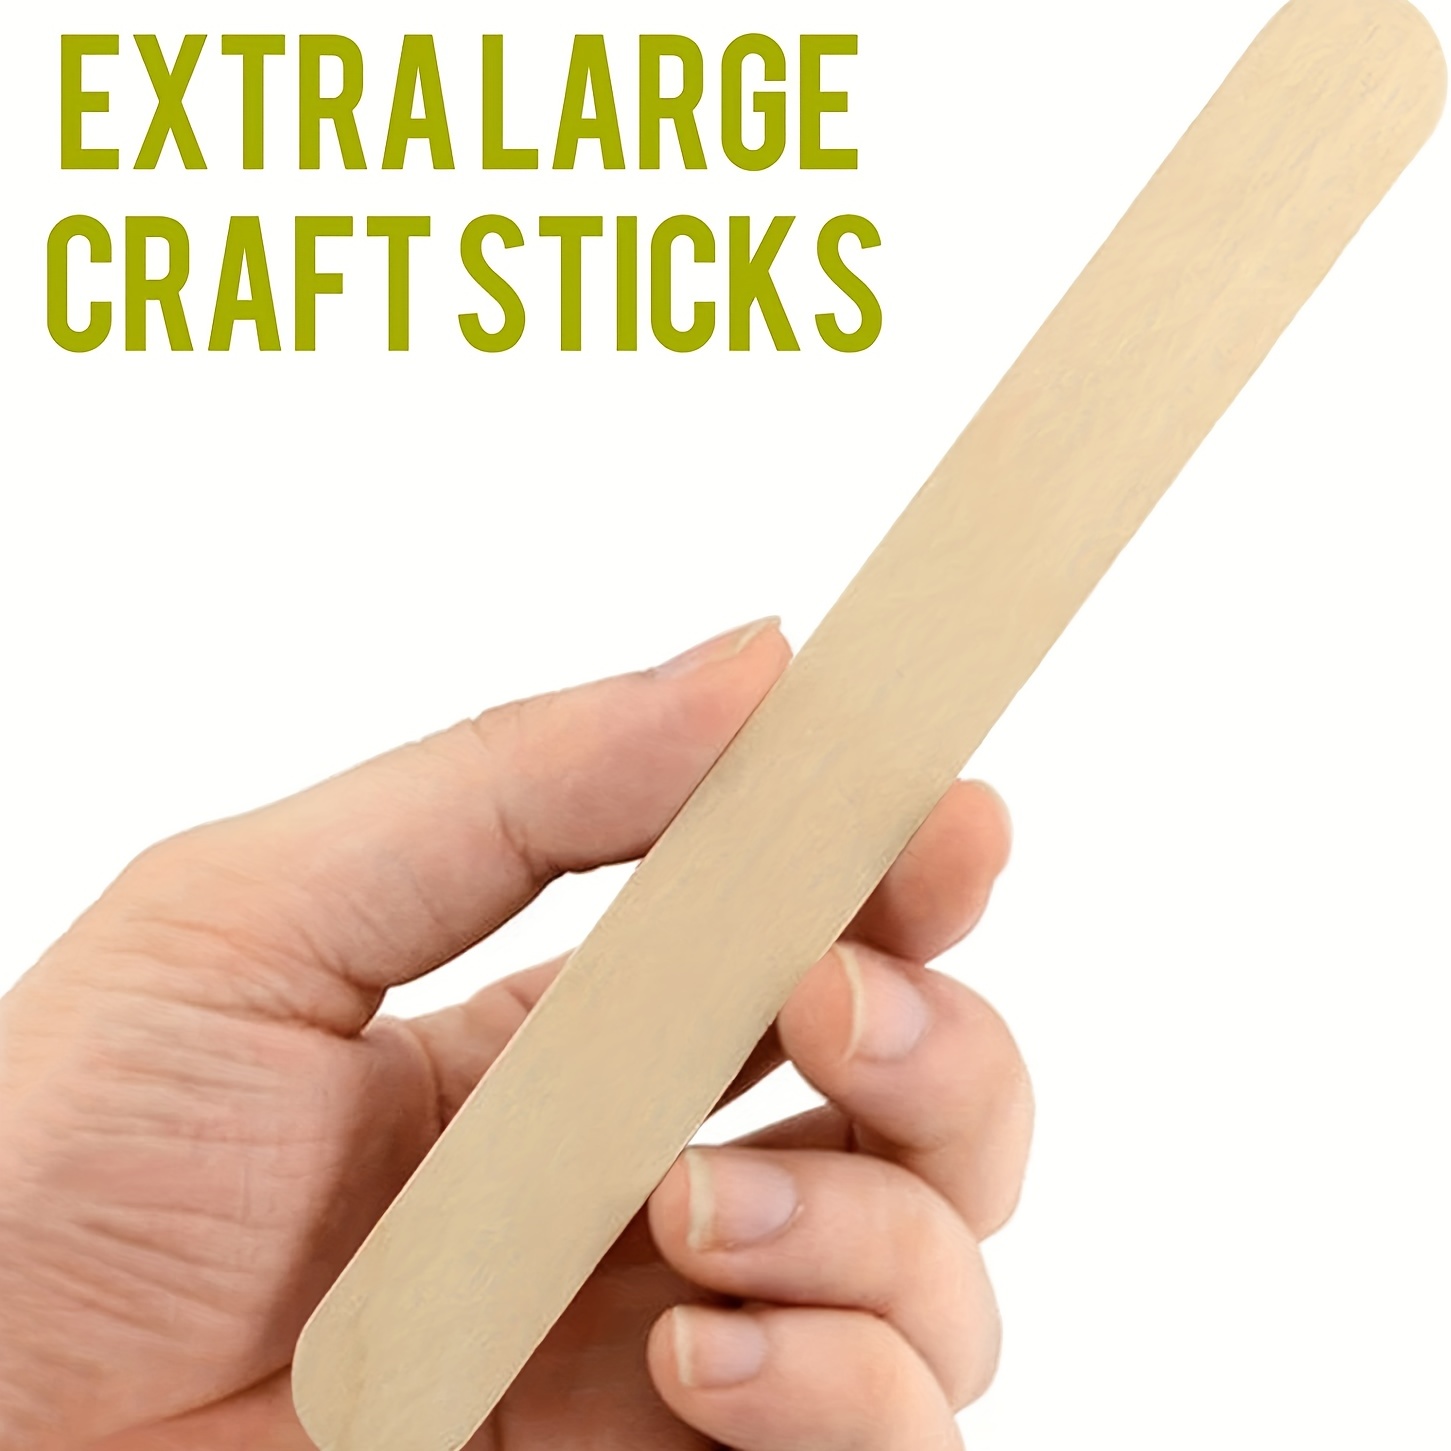 100pcs Jumbo Wooden Craft Sticks Wooden Popsicle Craft Sticks Stick 6 Long x 3/4 Wide Treat Sticks Ice Pop Sticks for DIY Crafts Home Art Projects